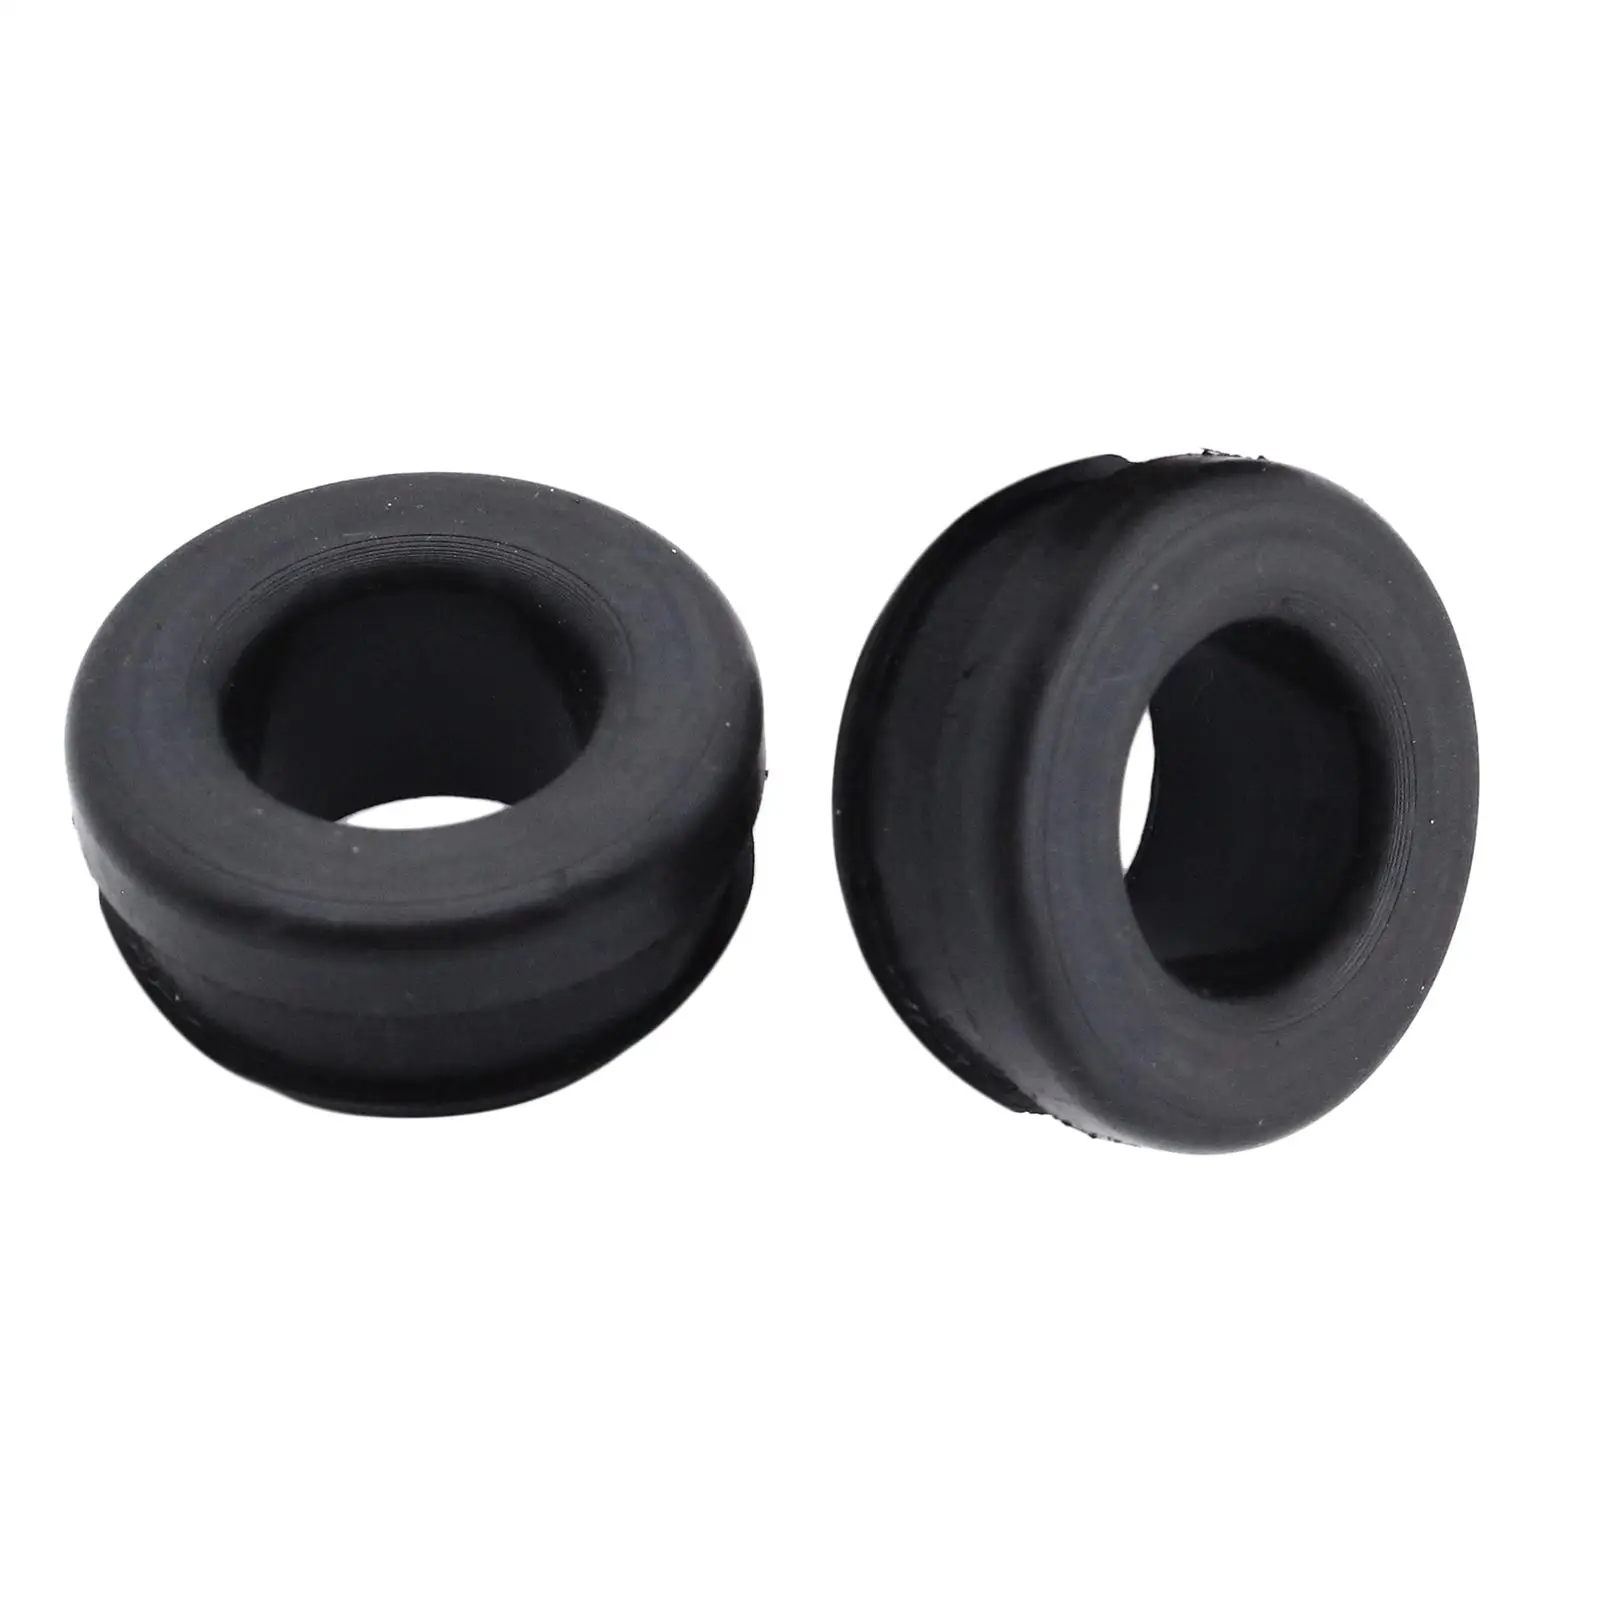 2Pcs Rubber Pcv Breather Grommets, Car Supplies Steel Covers Fit for Sbc Sbf Replacement